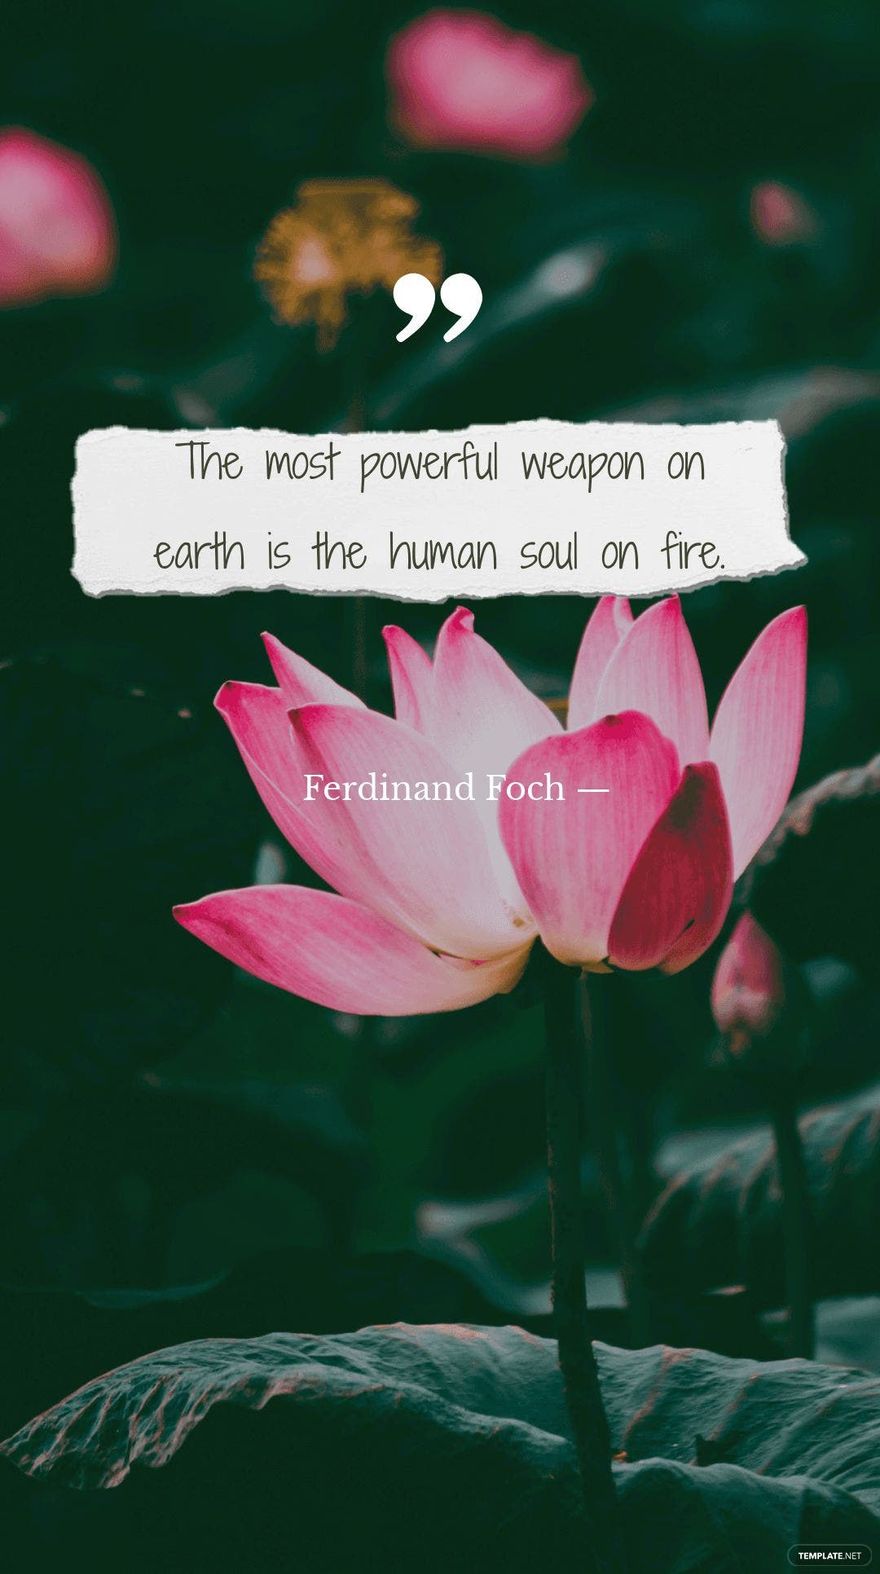 Ferdinand Foch — The most powerful weapon on earth is the human soul on fire.